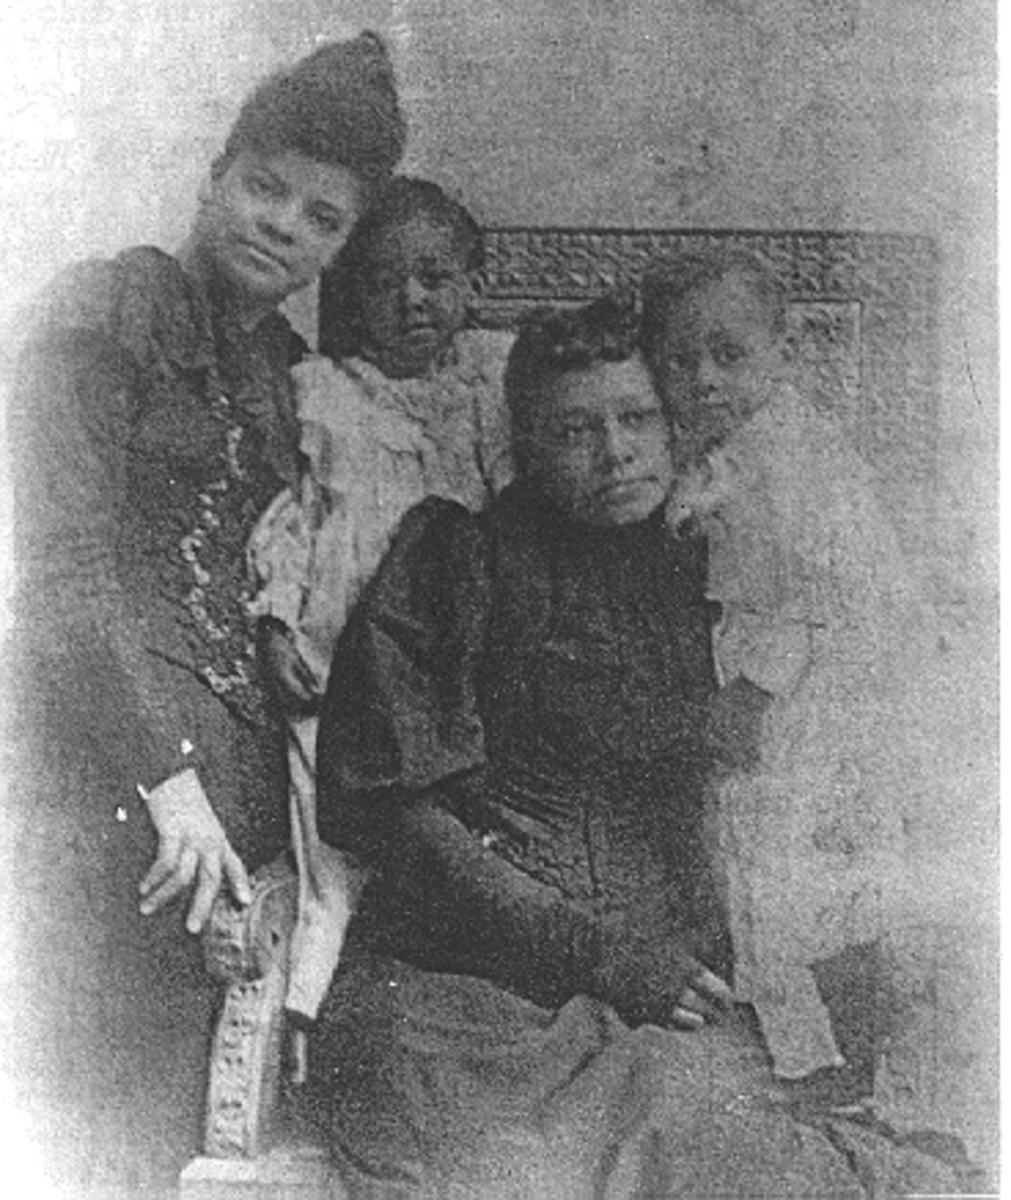 L to R: Ida B. Wells, Maureen Moss, Mrs. Betty Moss, and Tom Moss, Jr., taken about two years after the lynching.